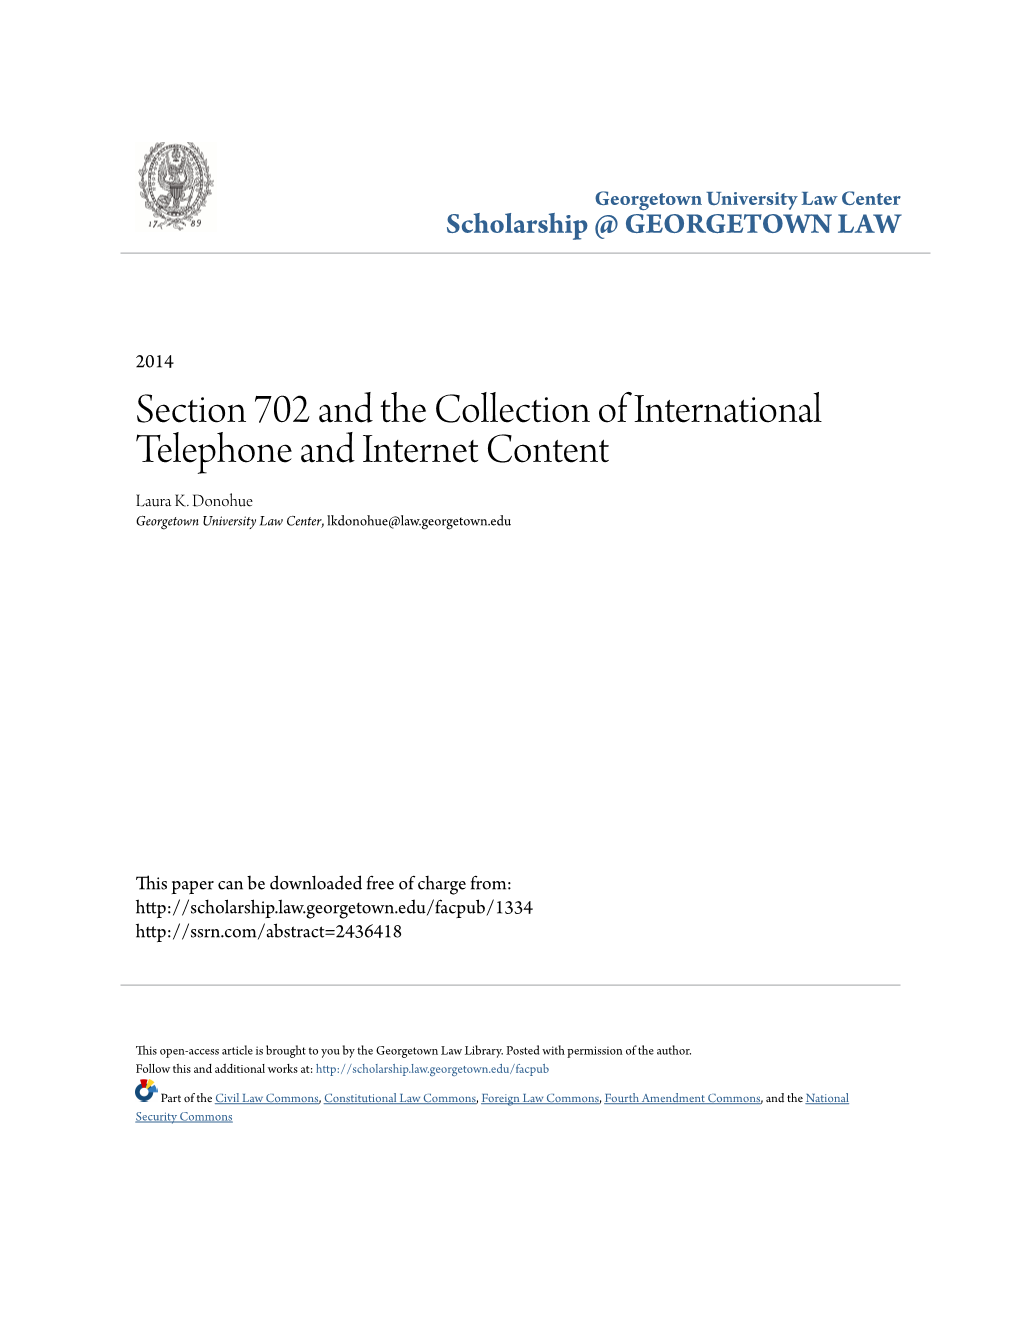 Section 702 and the Collection of International Telephone and Internet Content Laura K